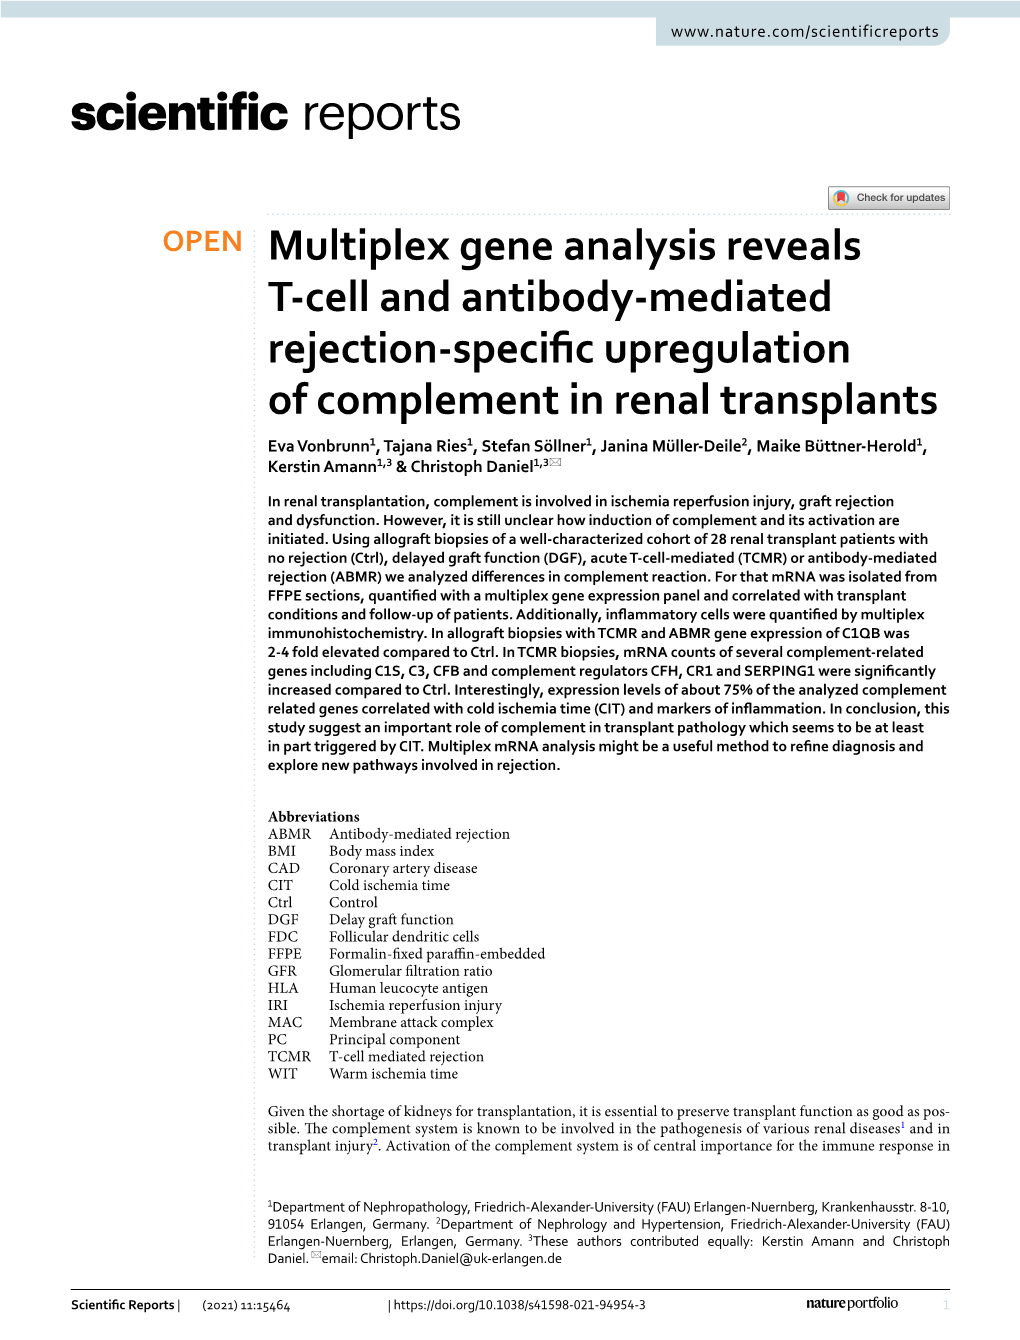 Multiplex Gene Analysis Reveals T-Cell and Antibody-Mediated Rejection